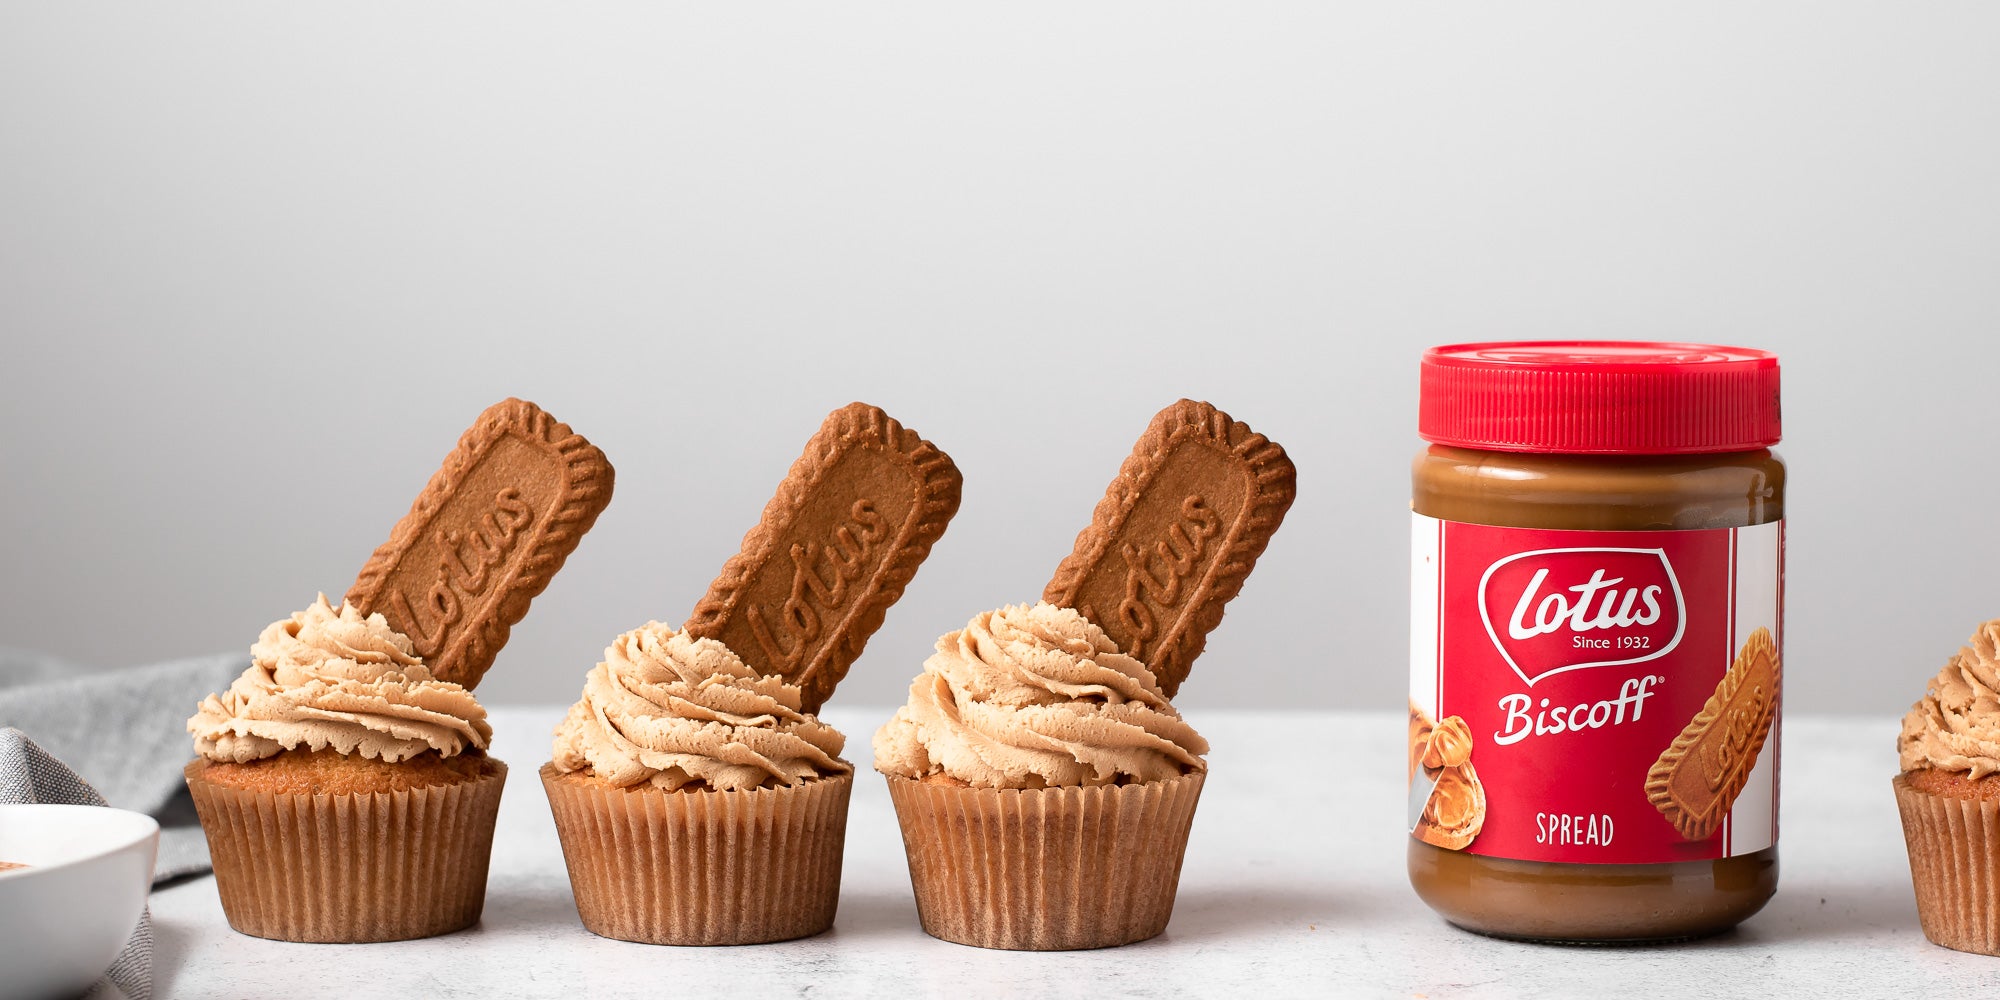 four Biscoff cupcakes next to jar of Lotus Biscoff spread